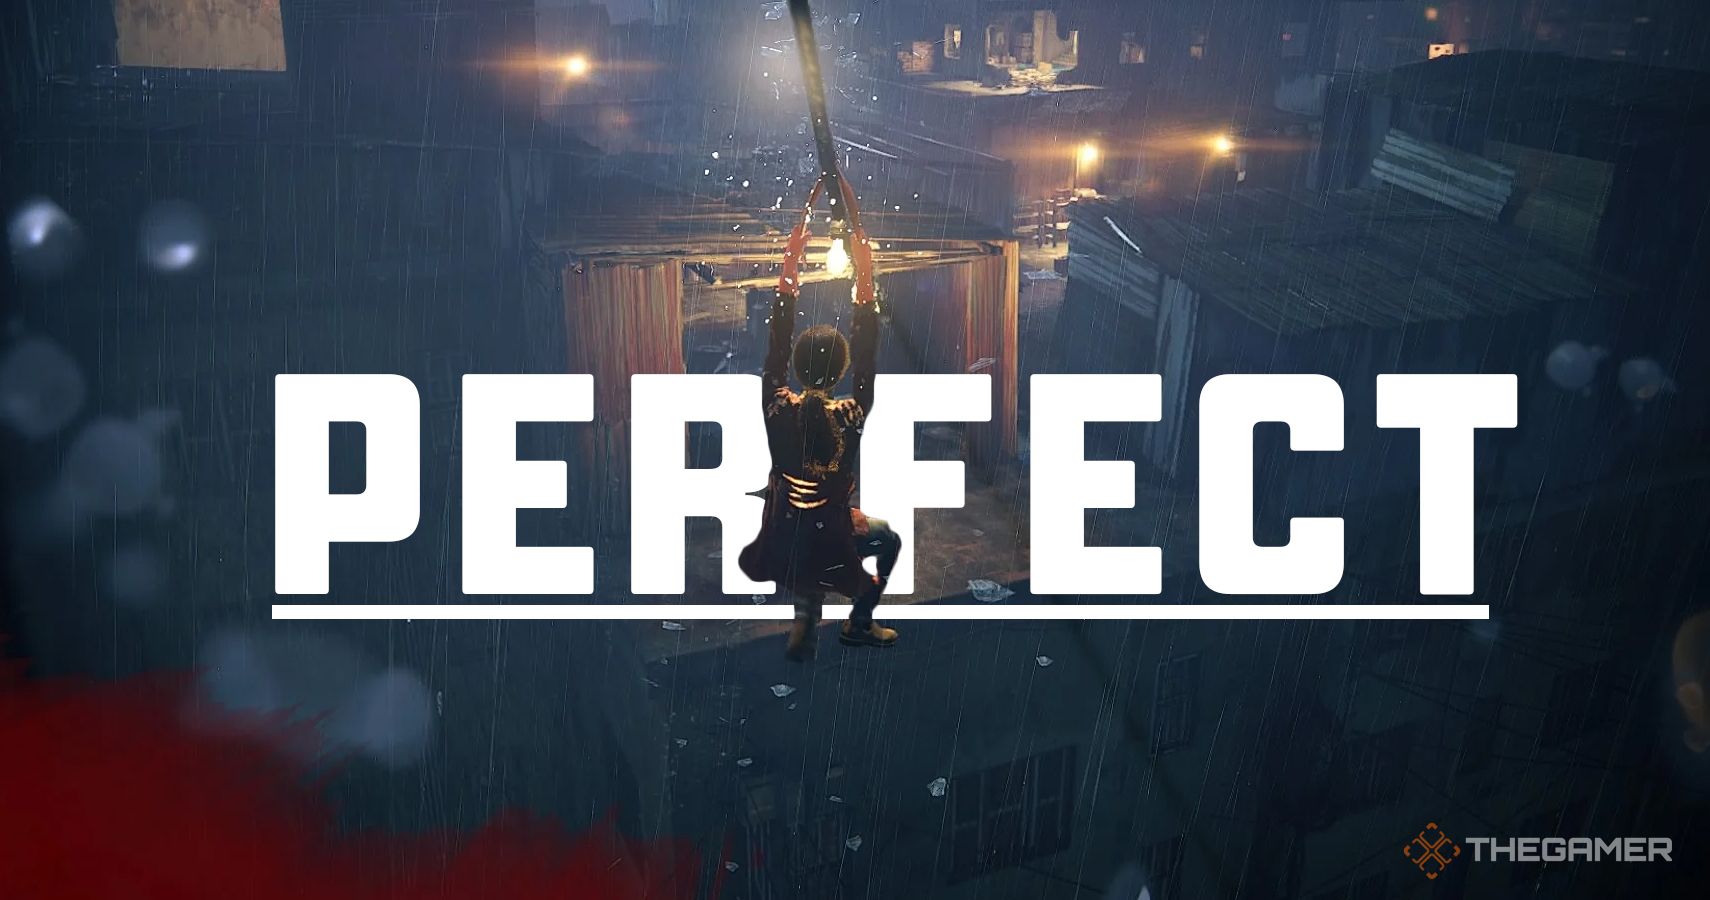 chloe frazer going down a zipline at night in the rain with the word perfect superimposed on the image